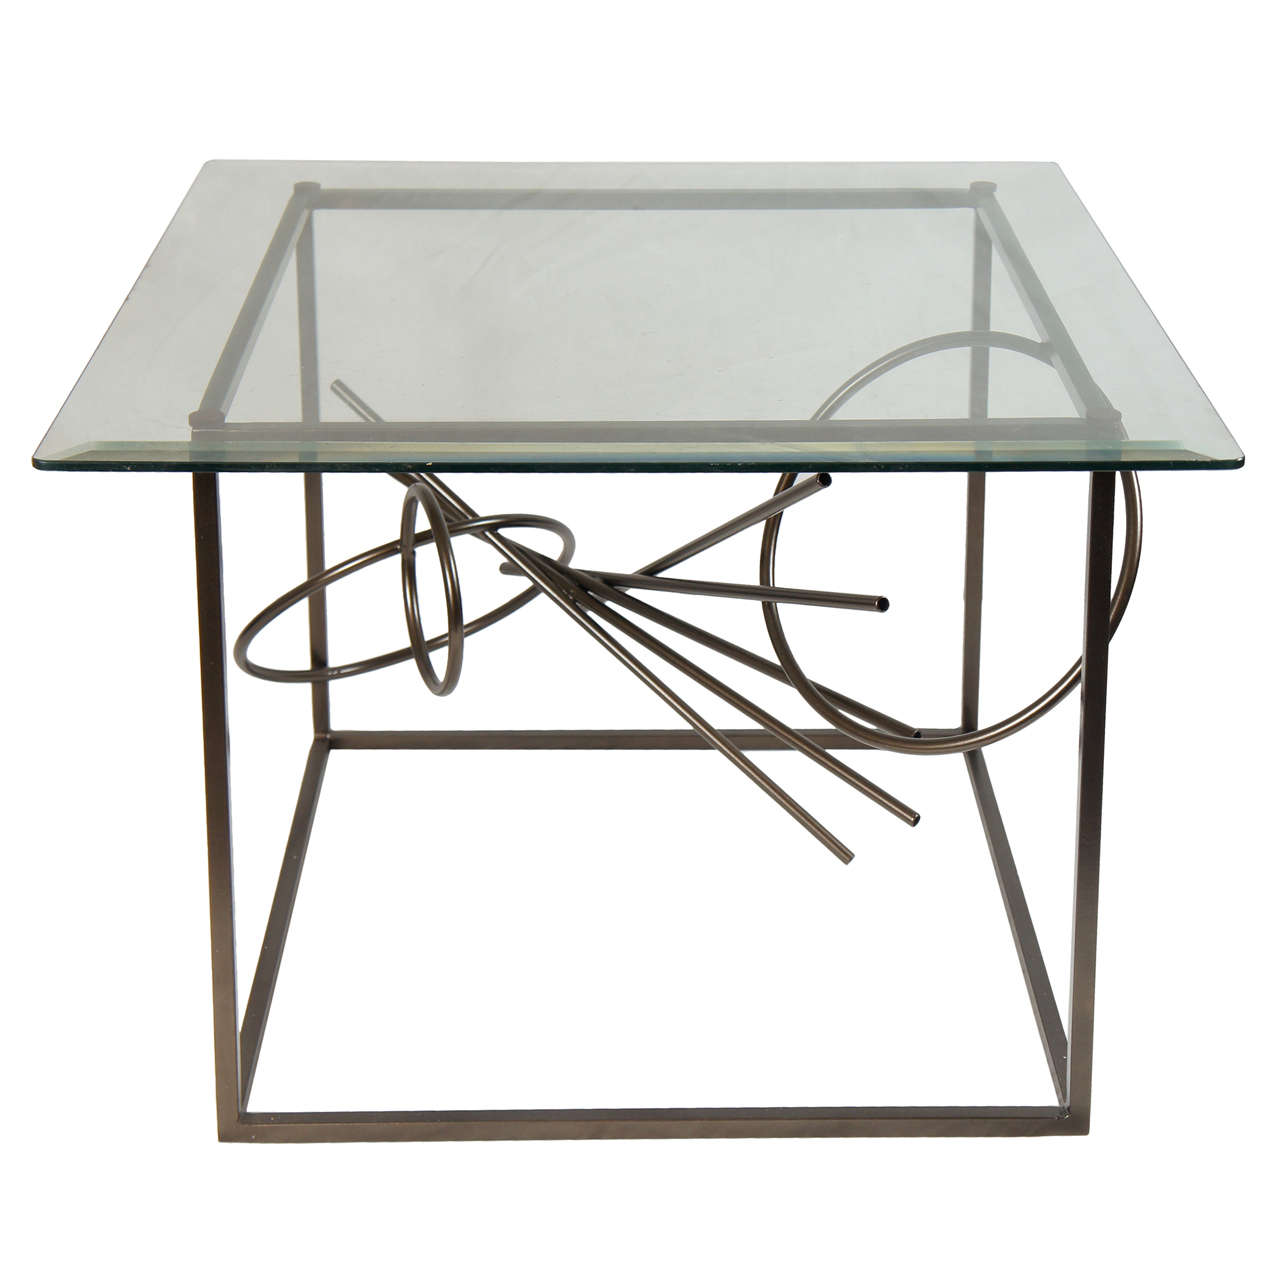 Original Custom-Made in America, One of a Kind Sculptural Table by Lou Blass For Sale